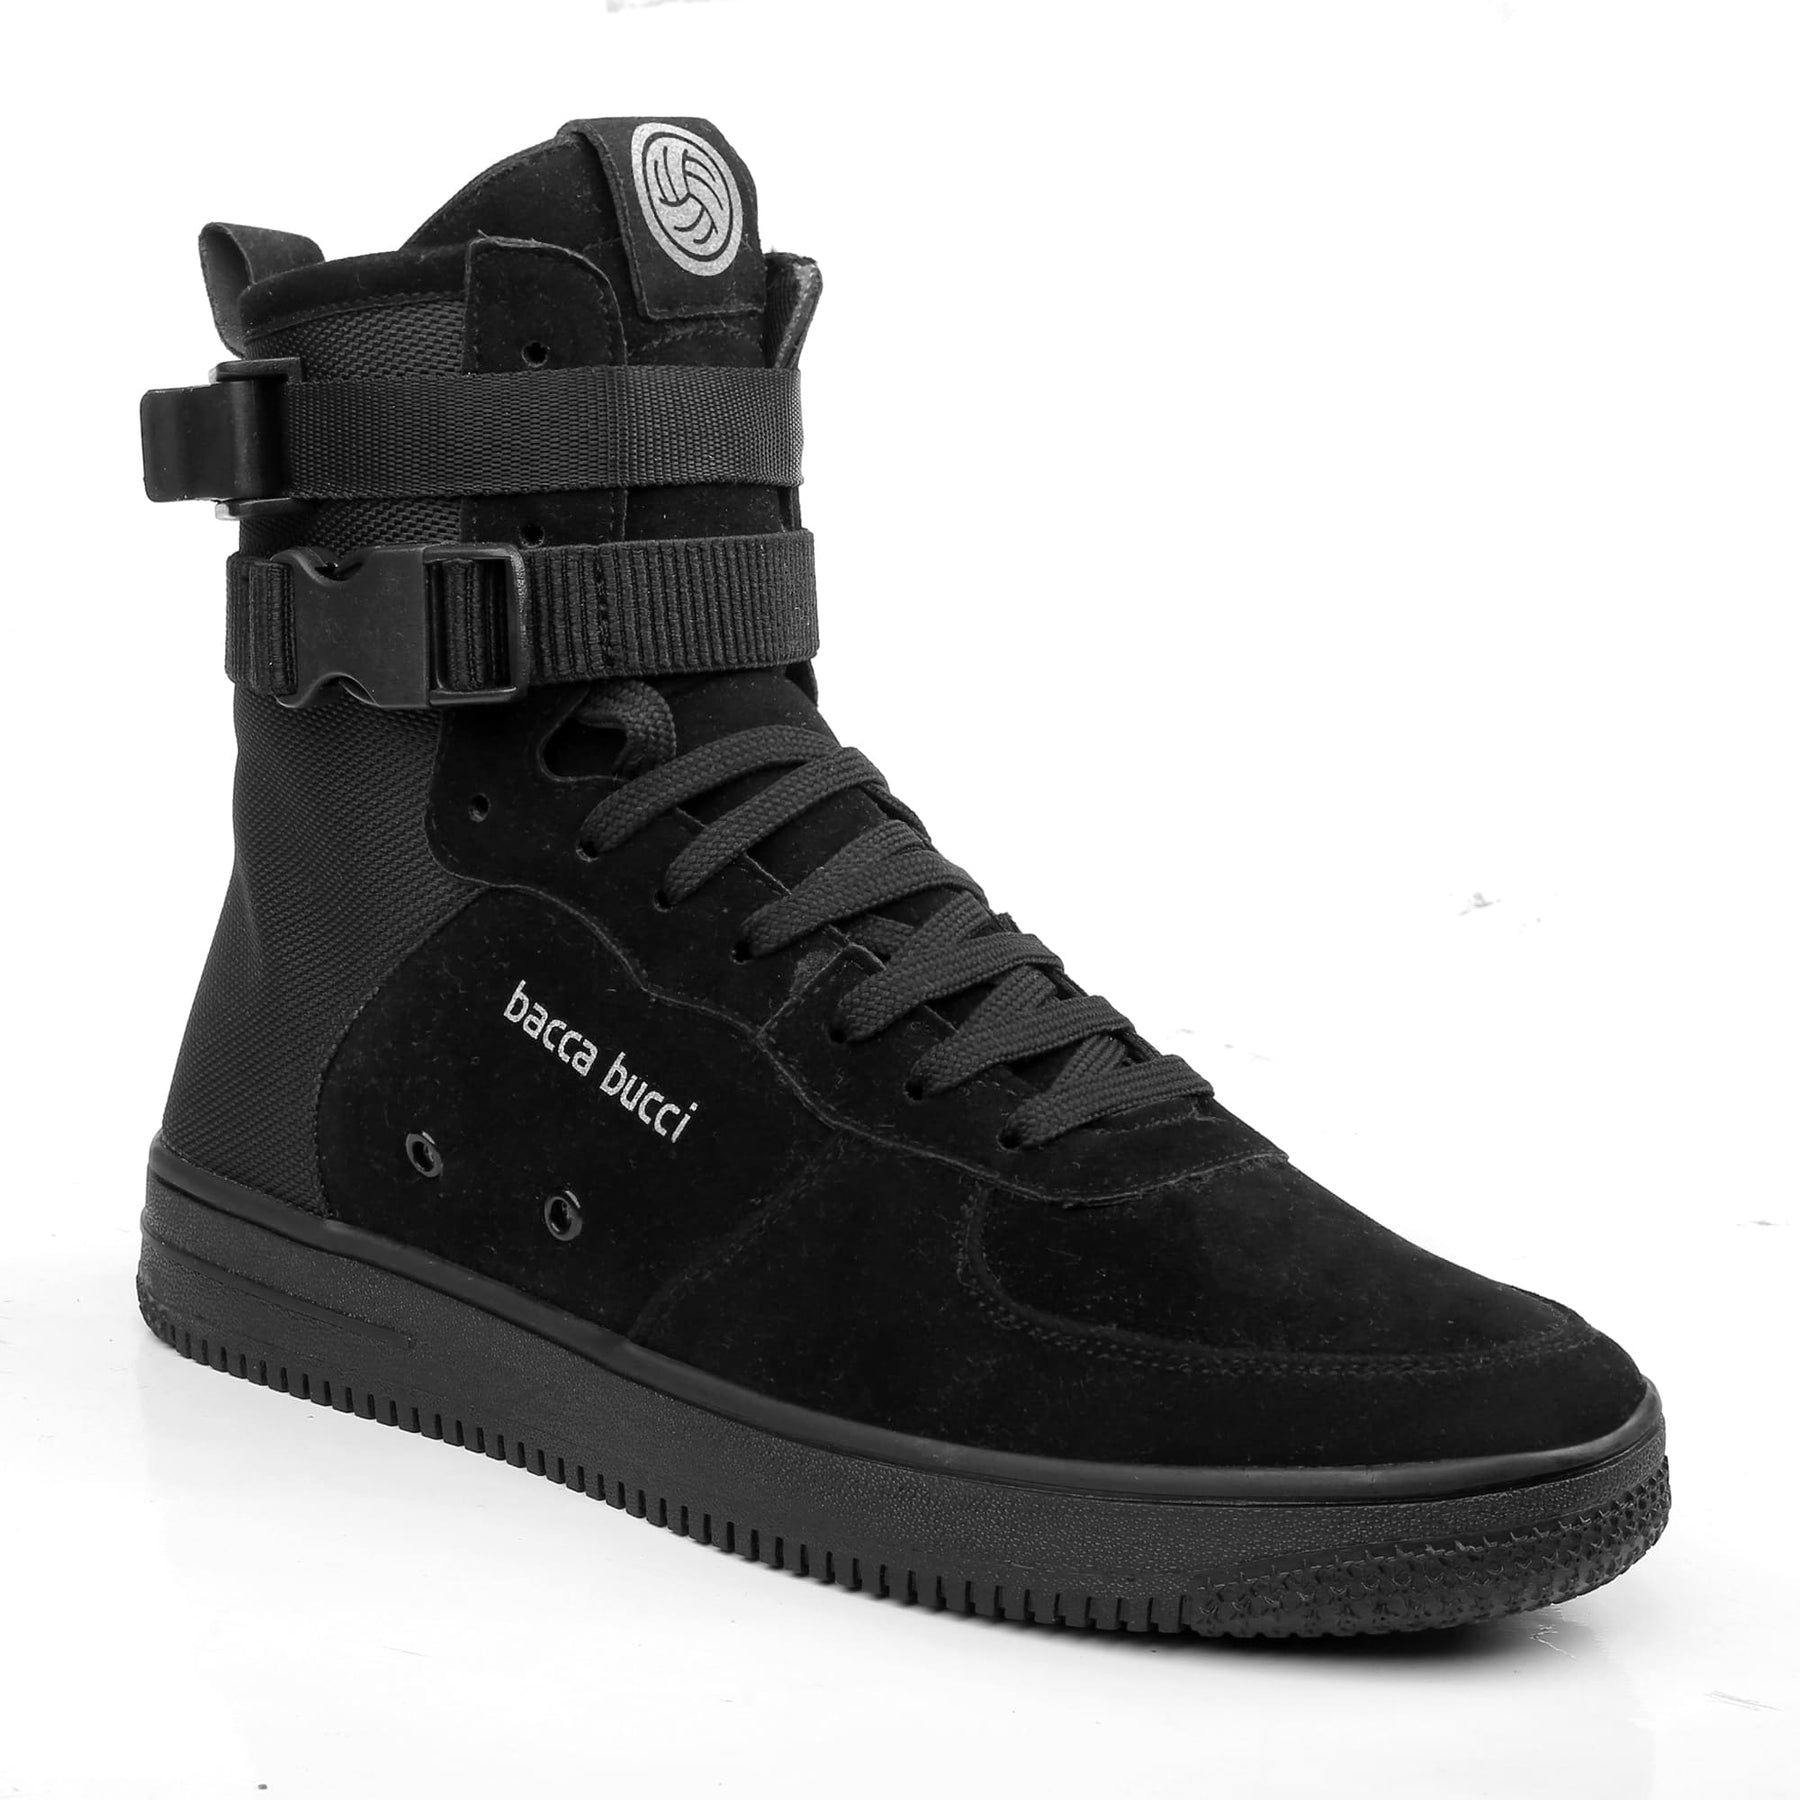 black sneakers for men, black casual shoes, black fashion sneakers for men, black hi top sneakers